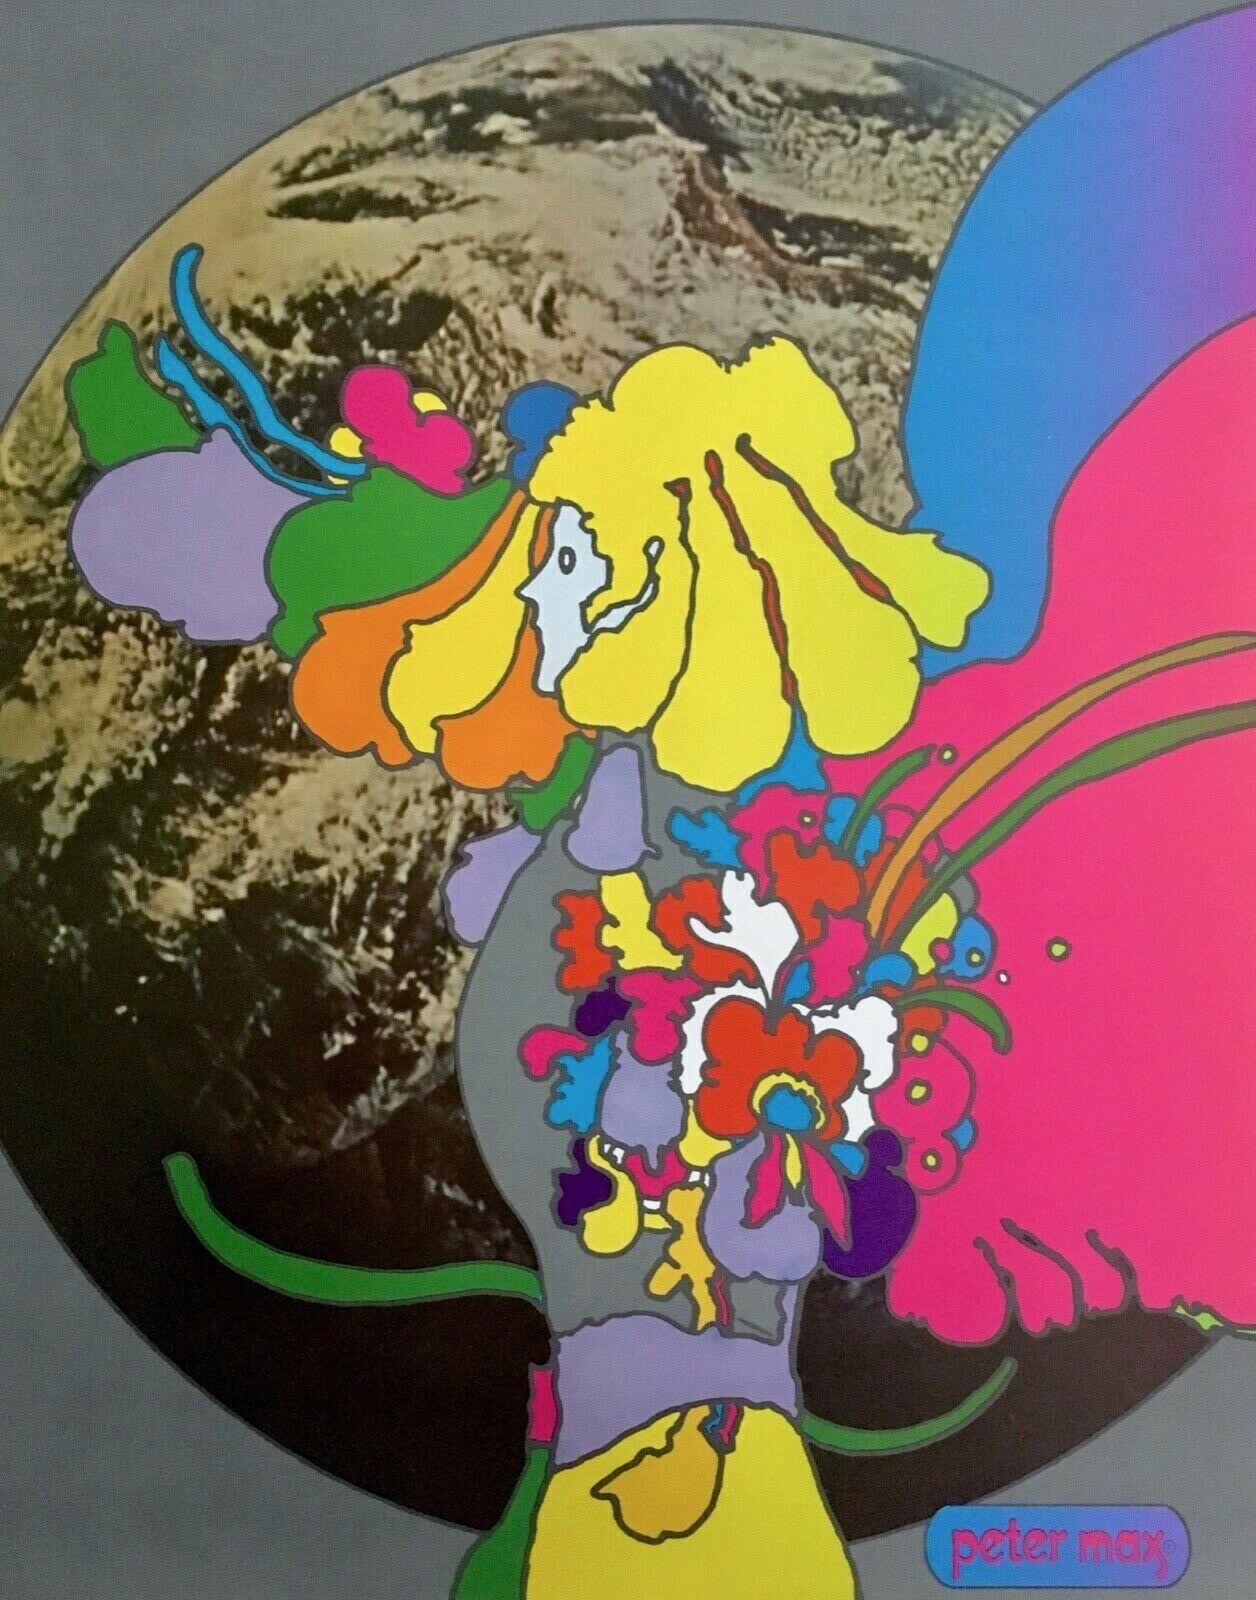 Moon Landing - SIGNED - Print by Peter Max